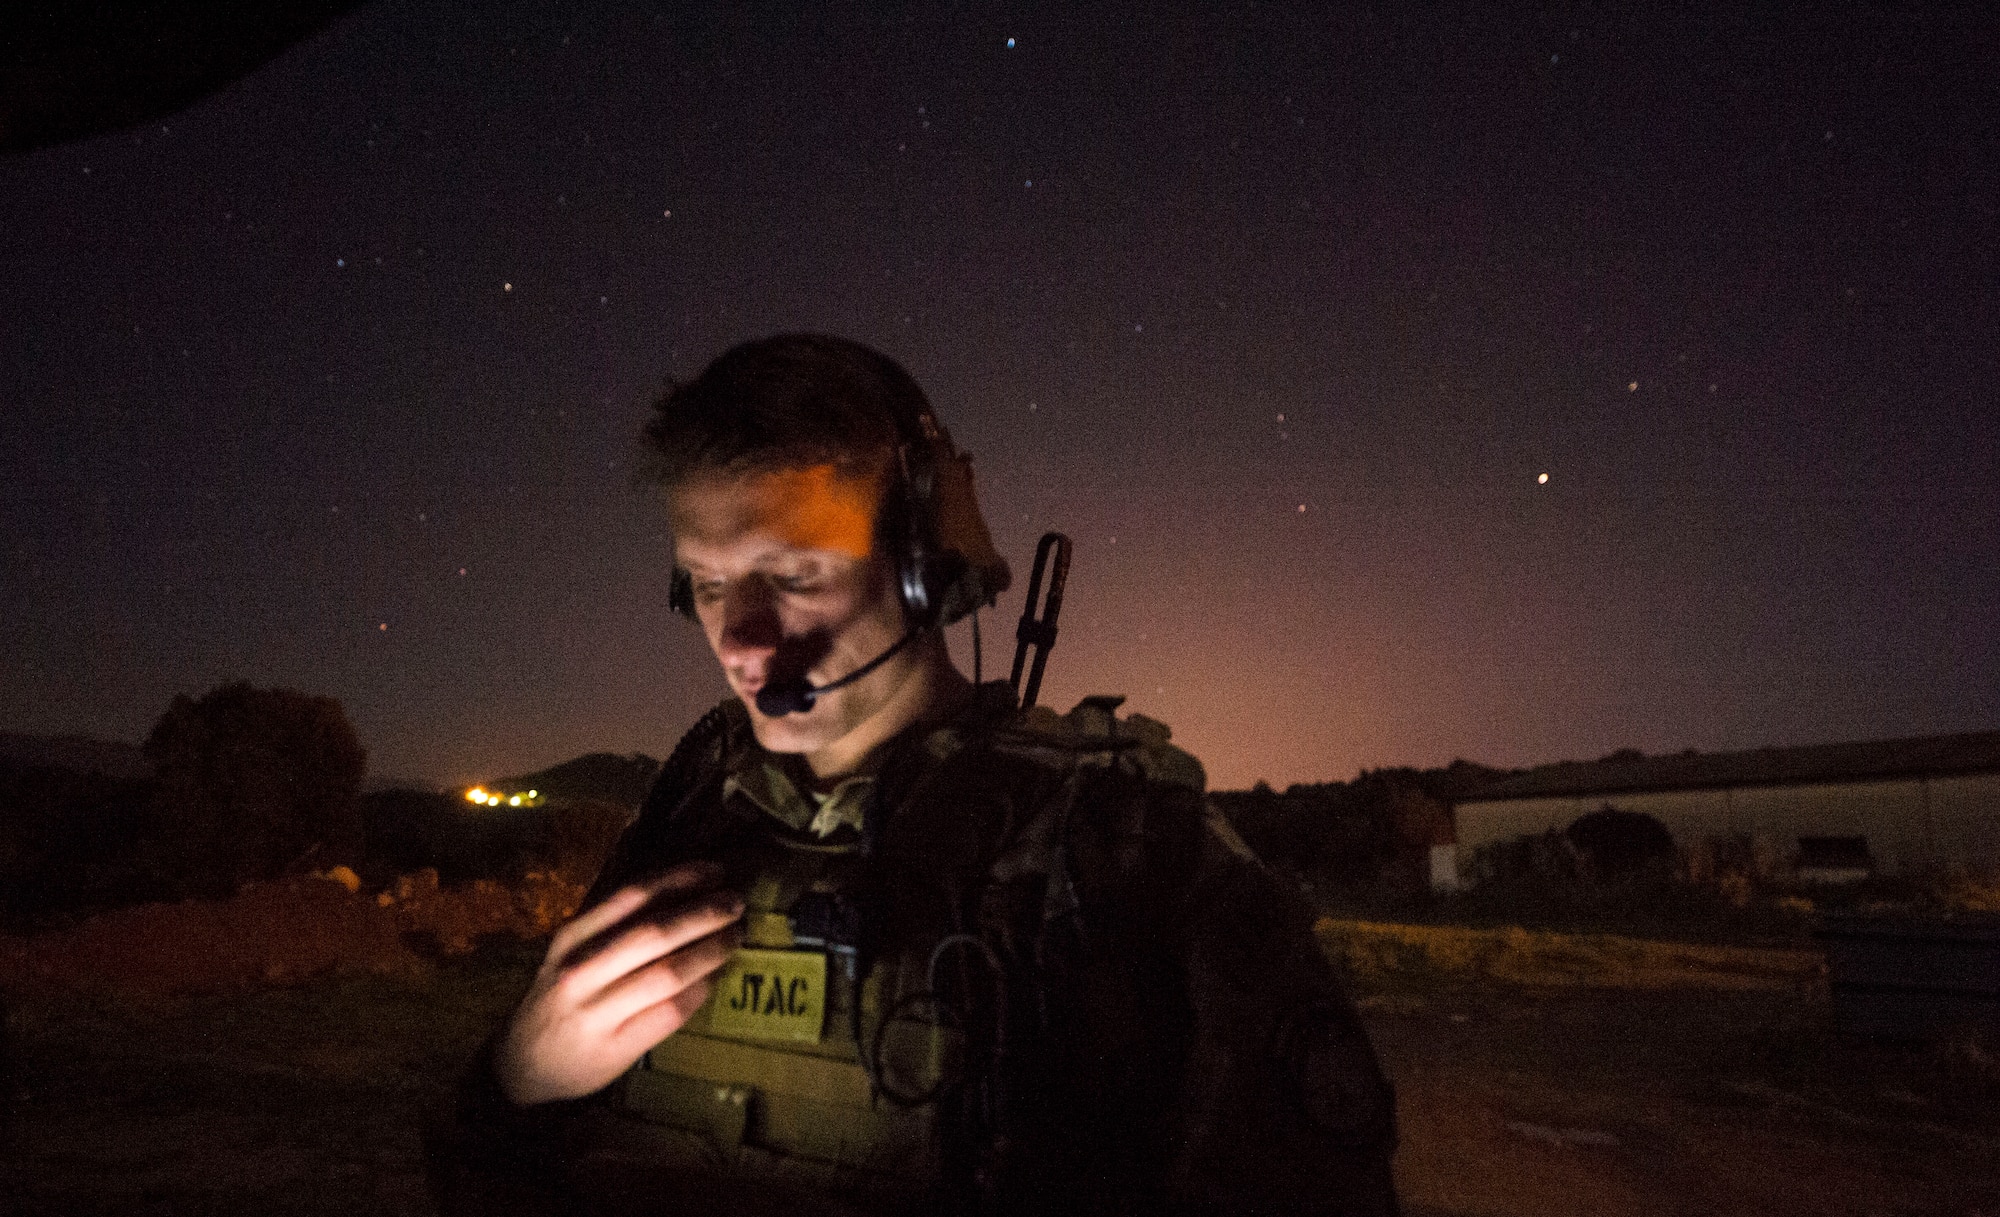 Senior Airman Tormod Lillekroken, 2nd Air Support Operations Squadron joint terminal attack controller, reviews training objectives as part of a night training scenario during Exercise Serpentex ‘16 in Corsica, France, March 15, 2016. Lillekroken recently reached his goal to be qualified as a joint terminal attack controller. Lillekroken has been in the tactical air control party career field for more than four years. (U.S. Air Force photo/Staff Sgt. Sara Keller)